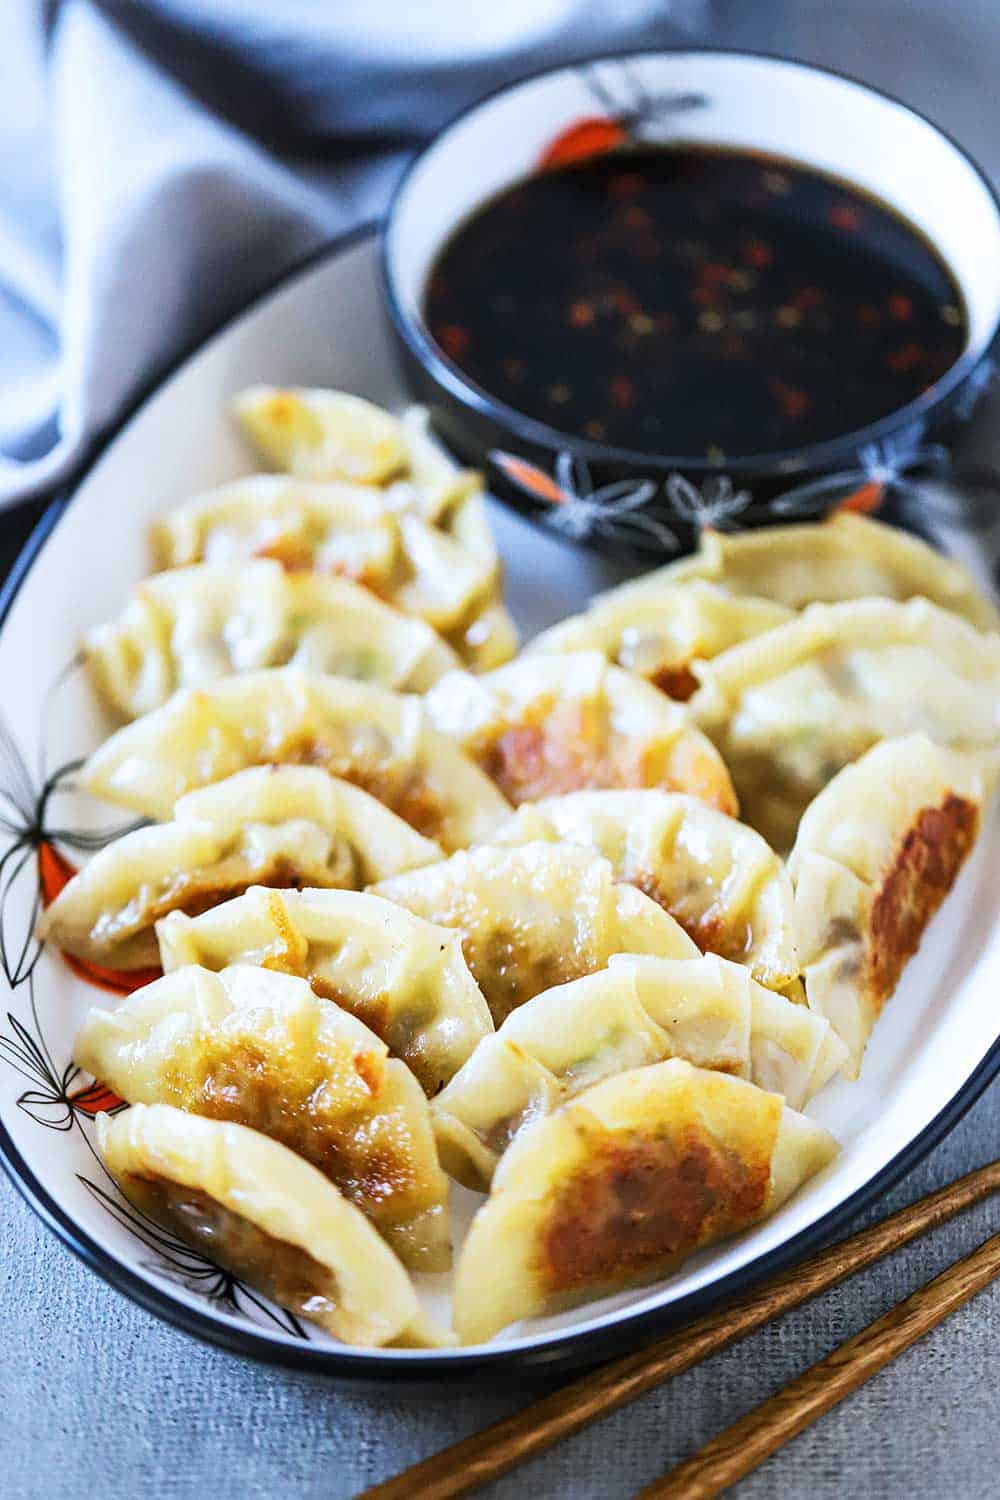 A platter of potstickers next to a bowl of dipping sauce.